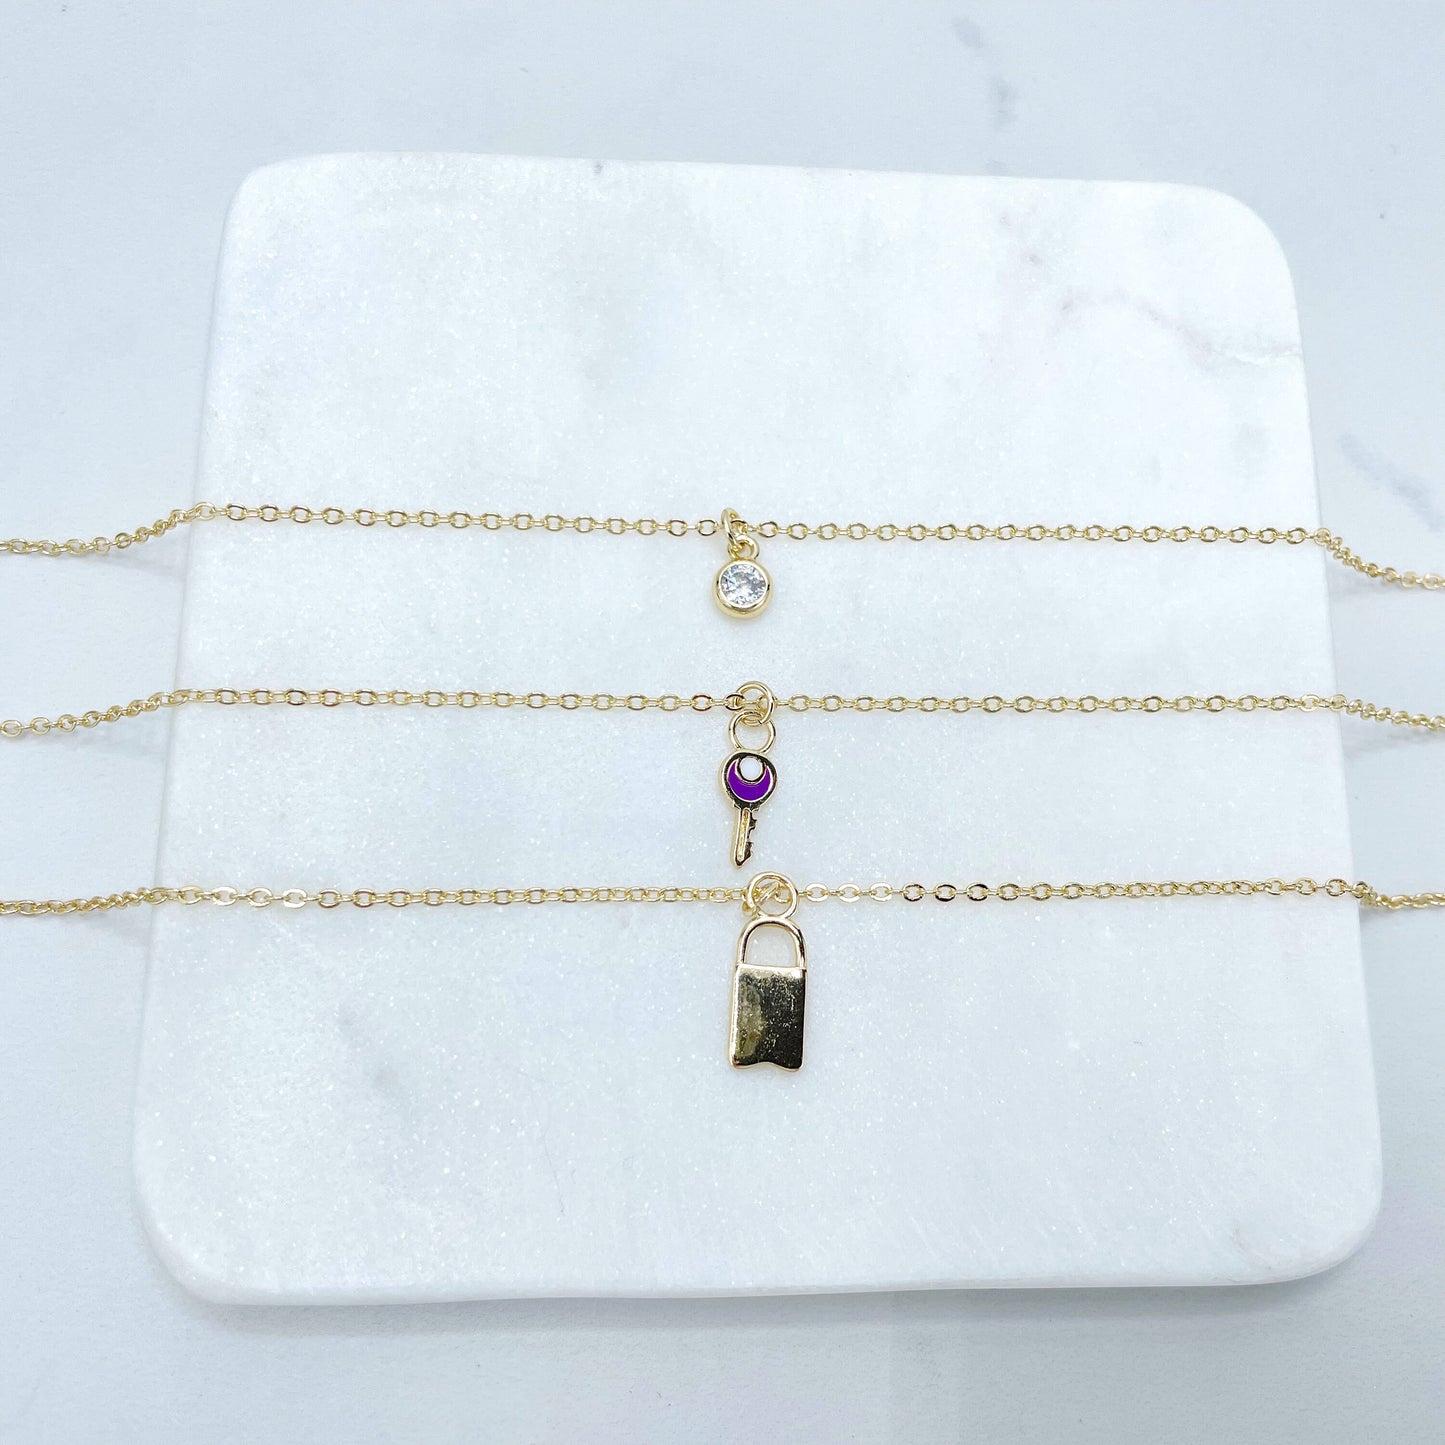 18k Gold Filled 2mm Rolo Chain Layered with 03 Necklaces, Gold Lock, Purple Enamel Key and Solitaire CZ, Wholesale Jewelry Making Supplies